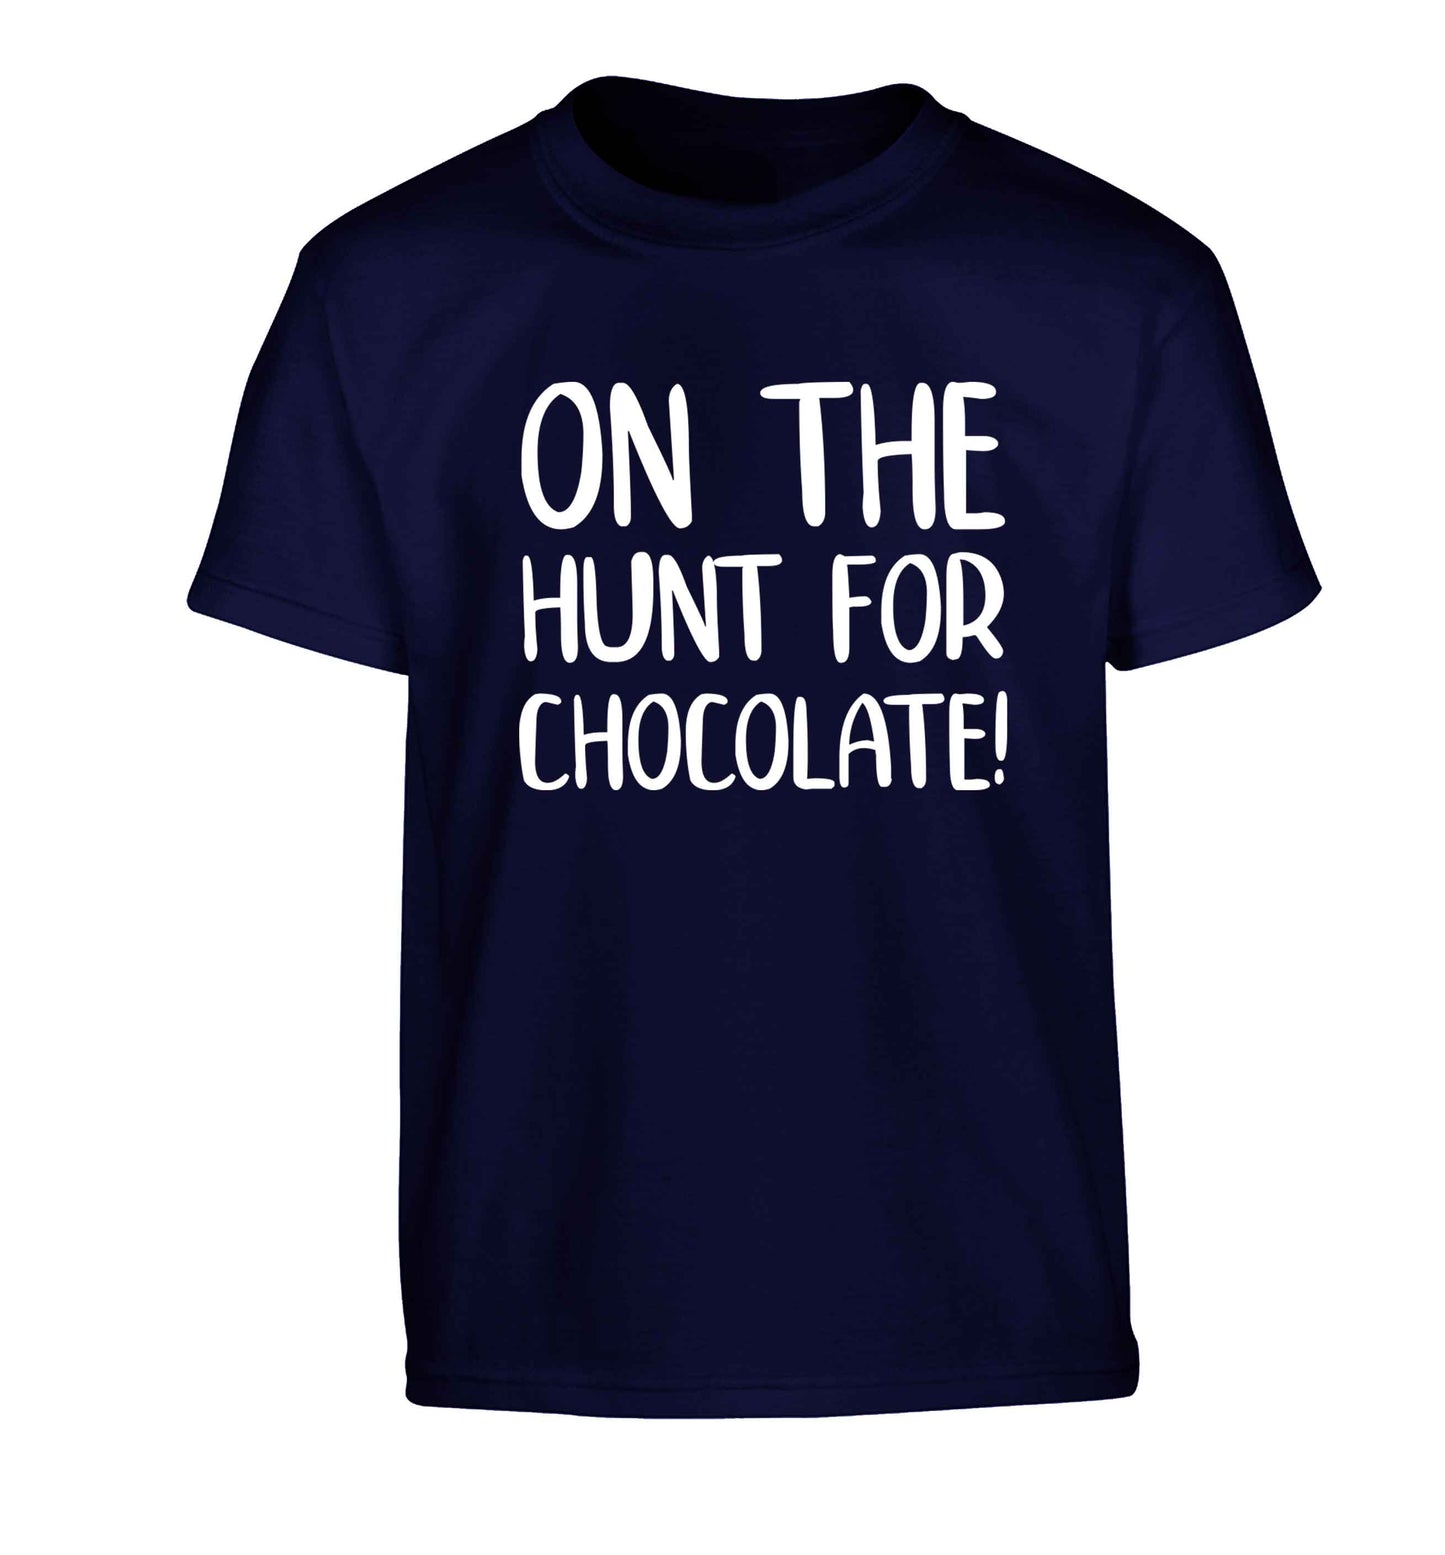 On the hunt for chocolate! Children's navy Tshirt 12-13 Years